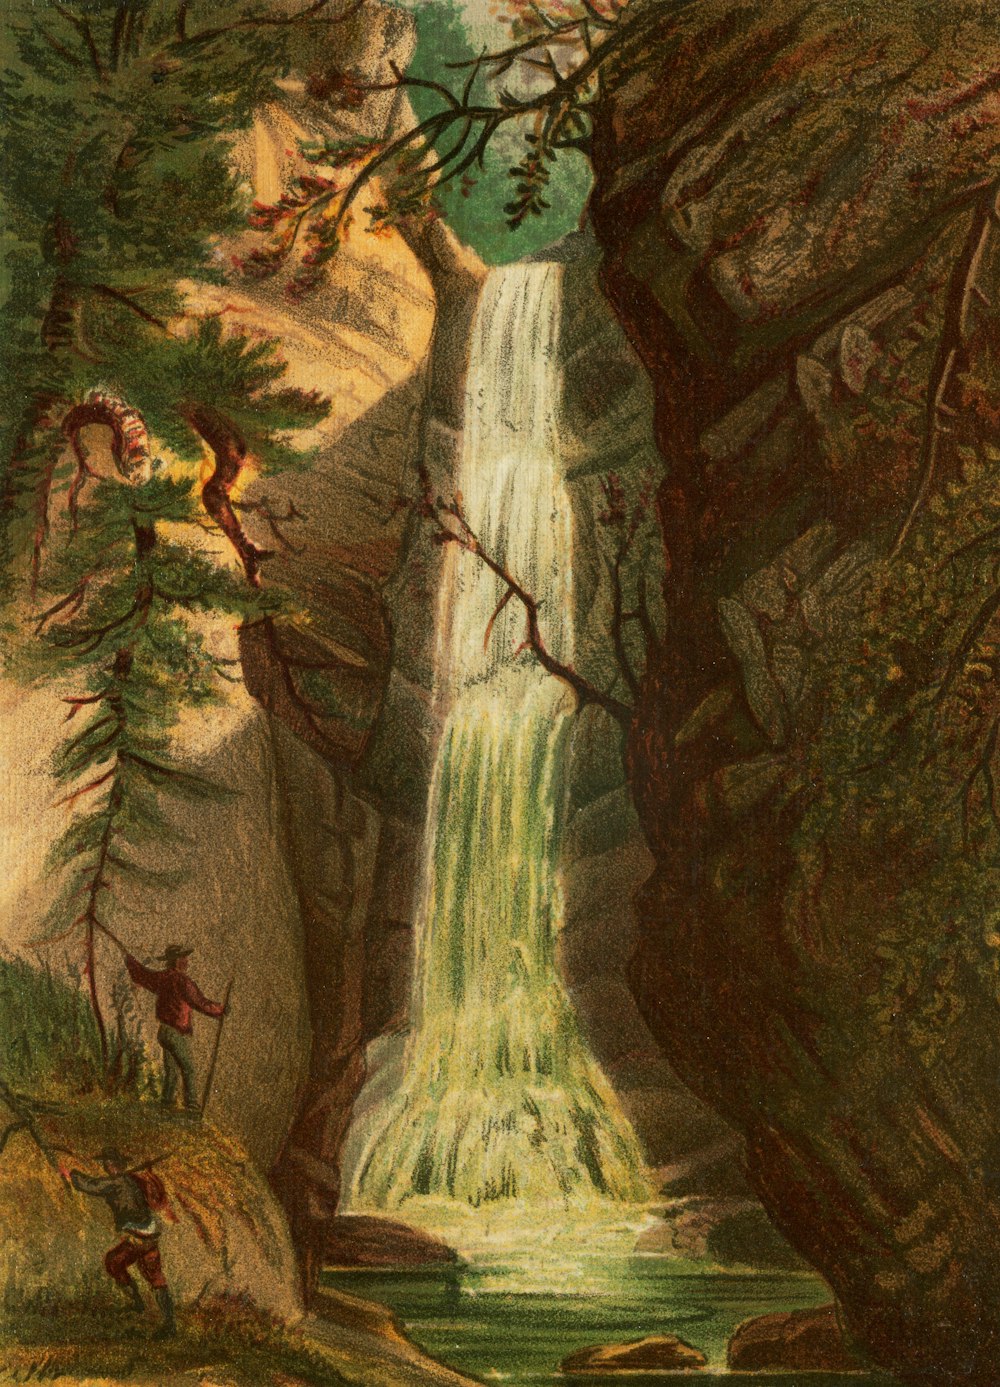 a painting of a waterfall surrounded by trees